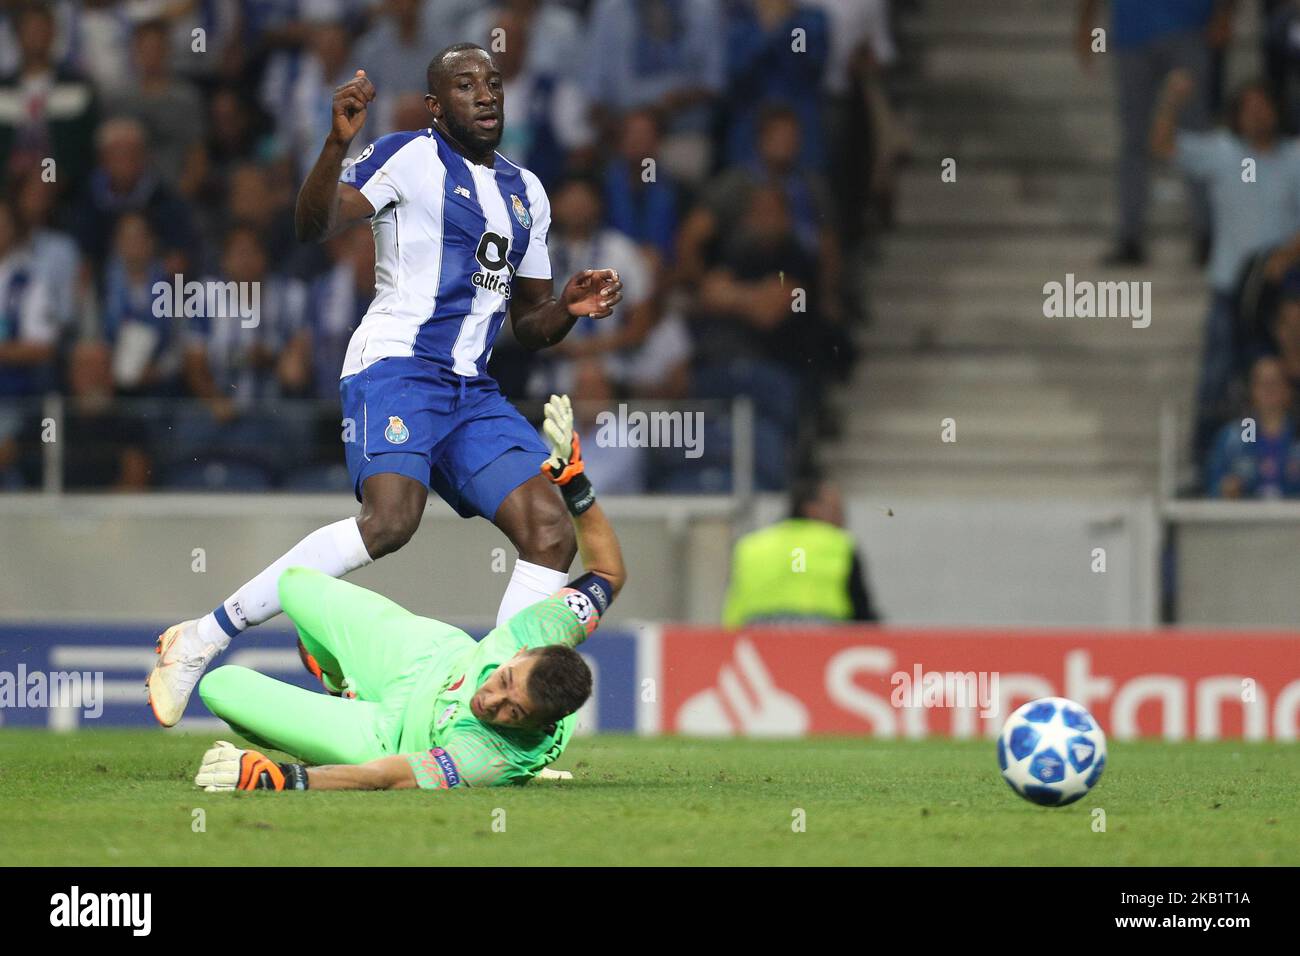 Porto's Malian forward Moussa Marega (L) in action with Fernando Muslera goalkeeper of Galatasaray (R) during the UEFA Champions League, match between FC Porto and Galatasaray, at Dragao Stadium in Porto on October 3, 2018 in Porto, Portugal. (Photo by Paulo Oliveira / DPI / NurPhoto) Stock Photo